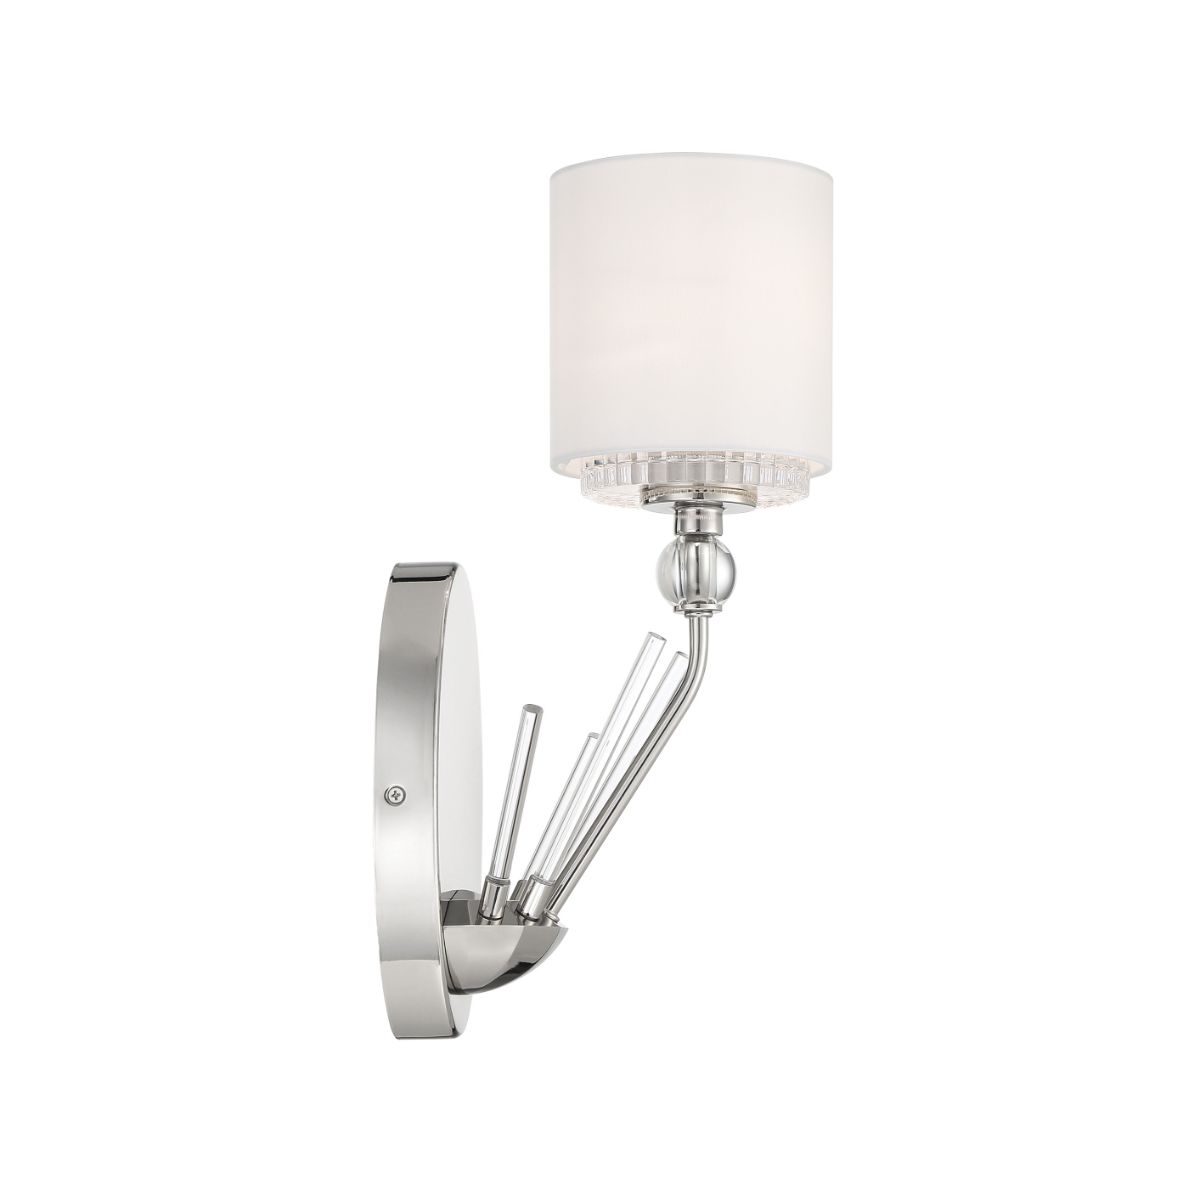 Sutton 16 in. Armed Sconce Polished Nickel Finish